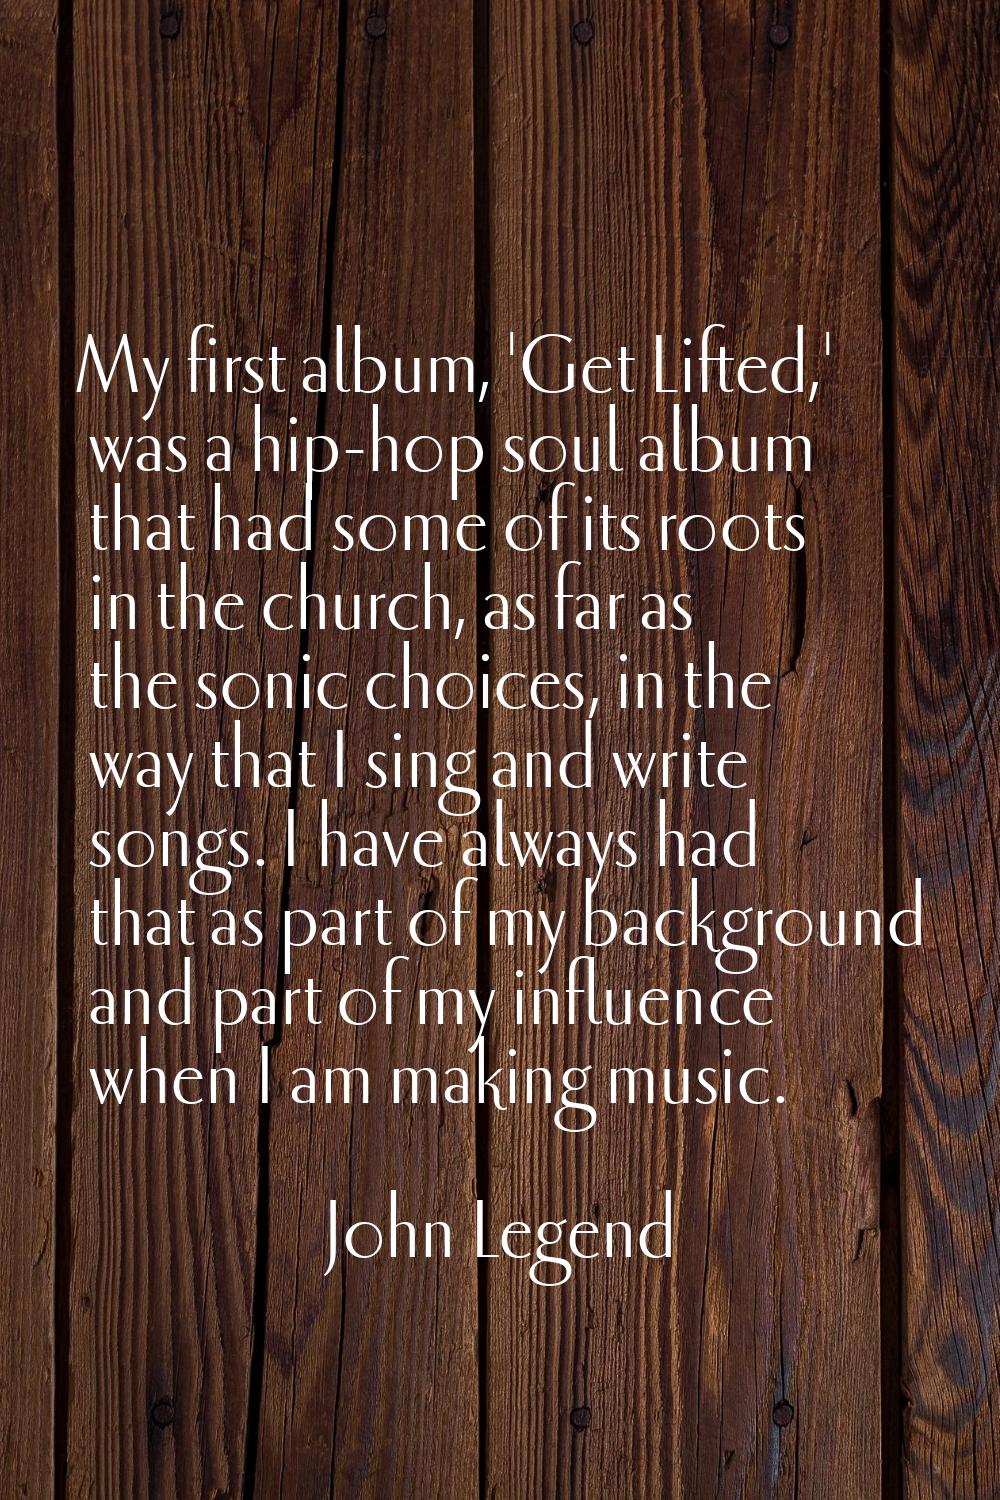 My first album, 'Get Lifted,' was a hip-hop soul album that had some of its roots in the church, as